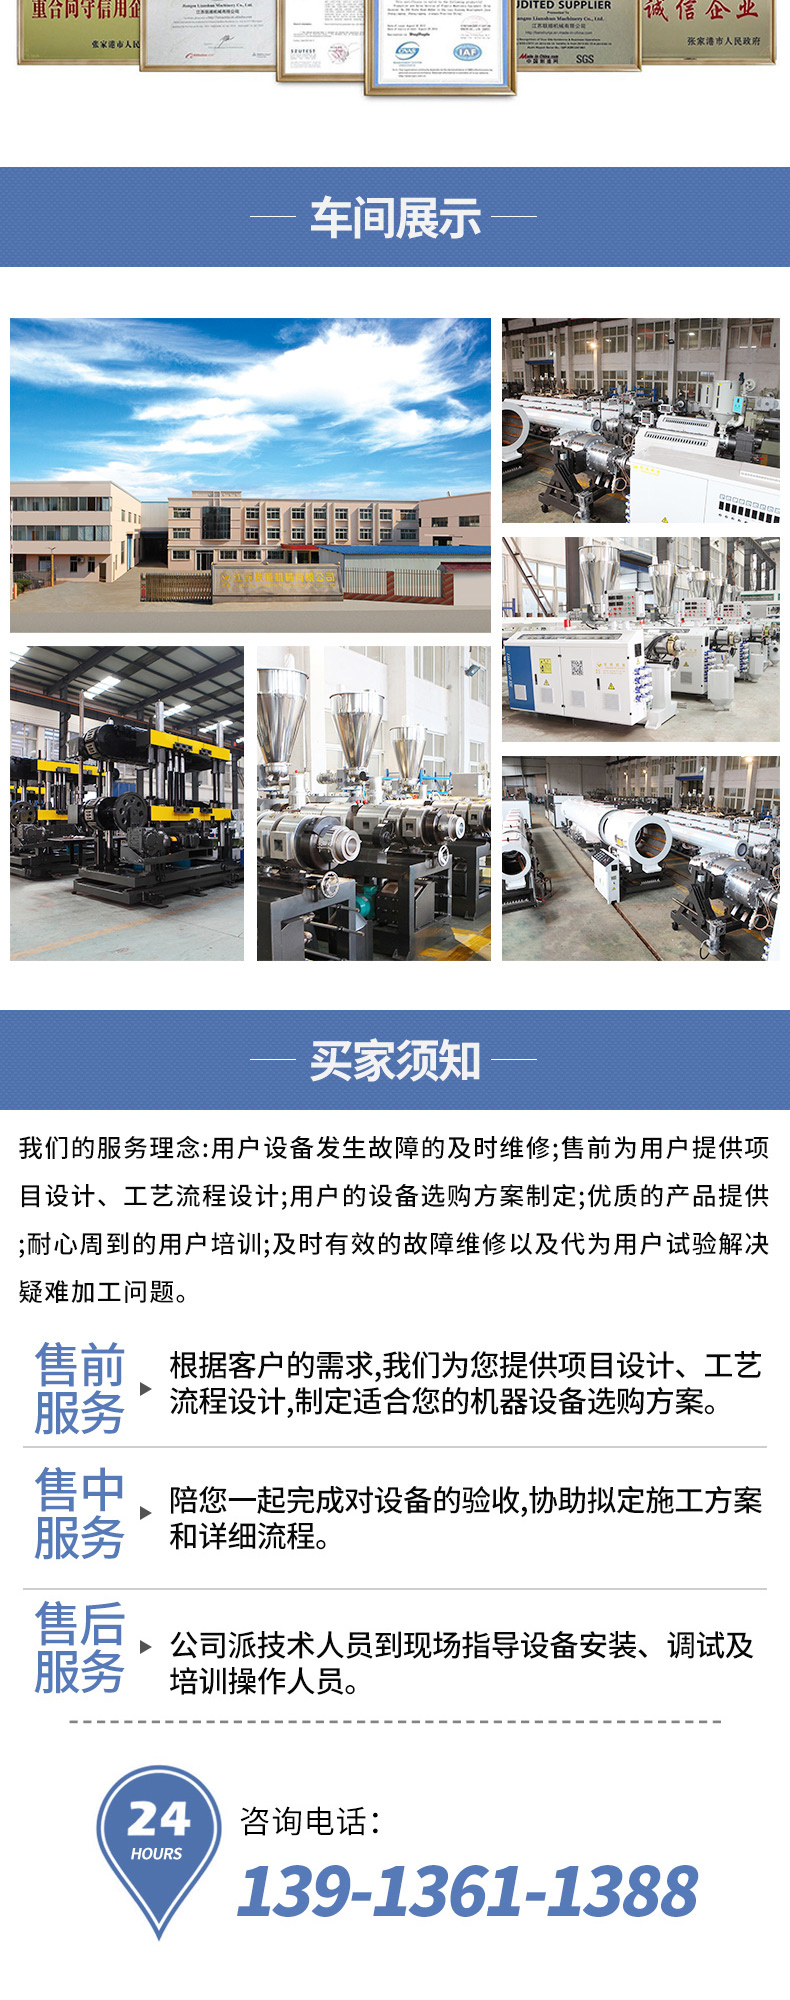 Lianshun Automatic High Speed Pipe Production Line One Output Four Pipe Production Unit PE Pipe Extruder